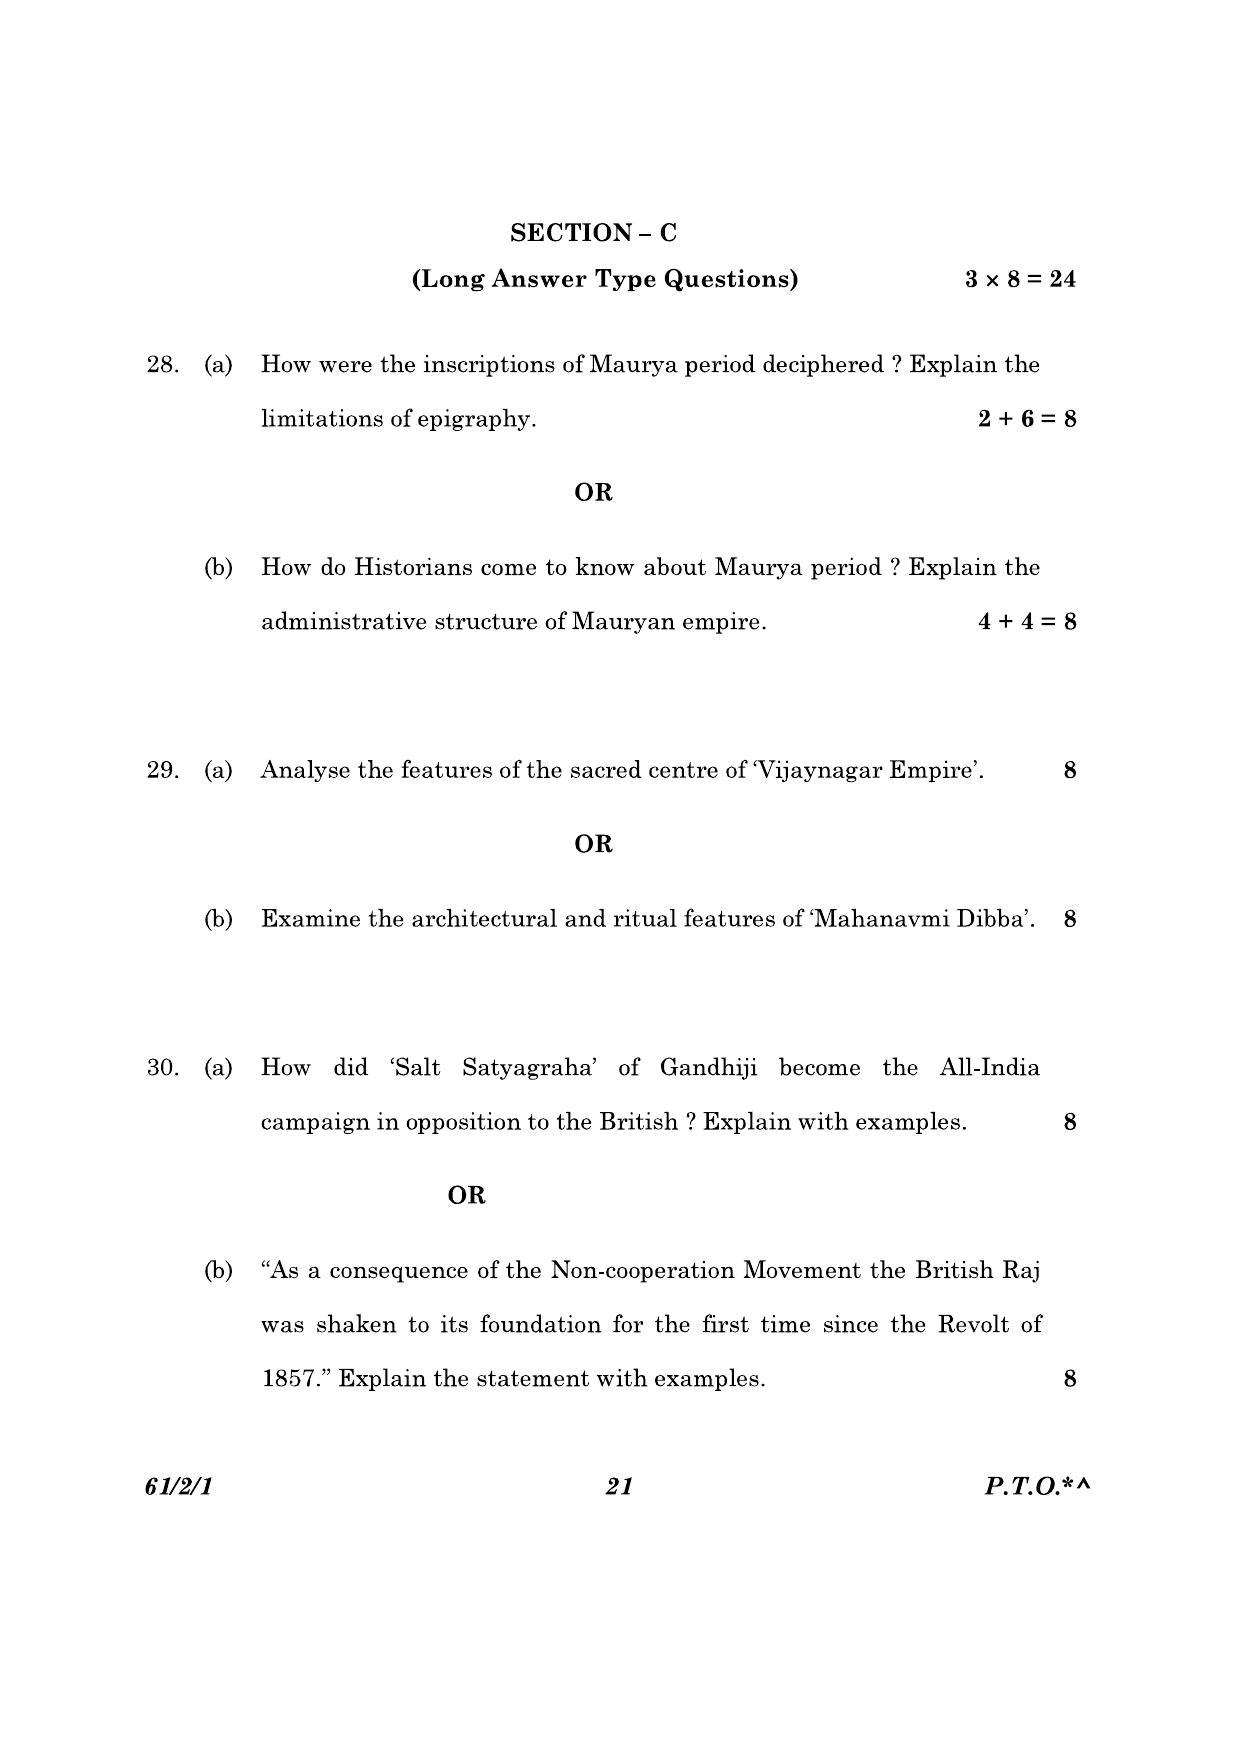 CBSE Class 12 61-2-1 History 2023 Question Paper - Page 21